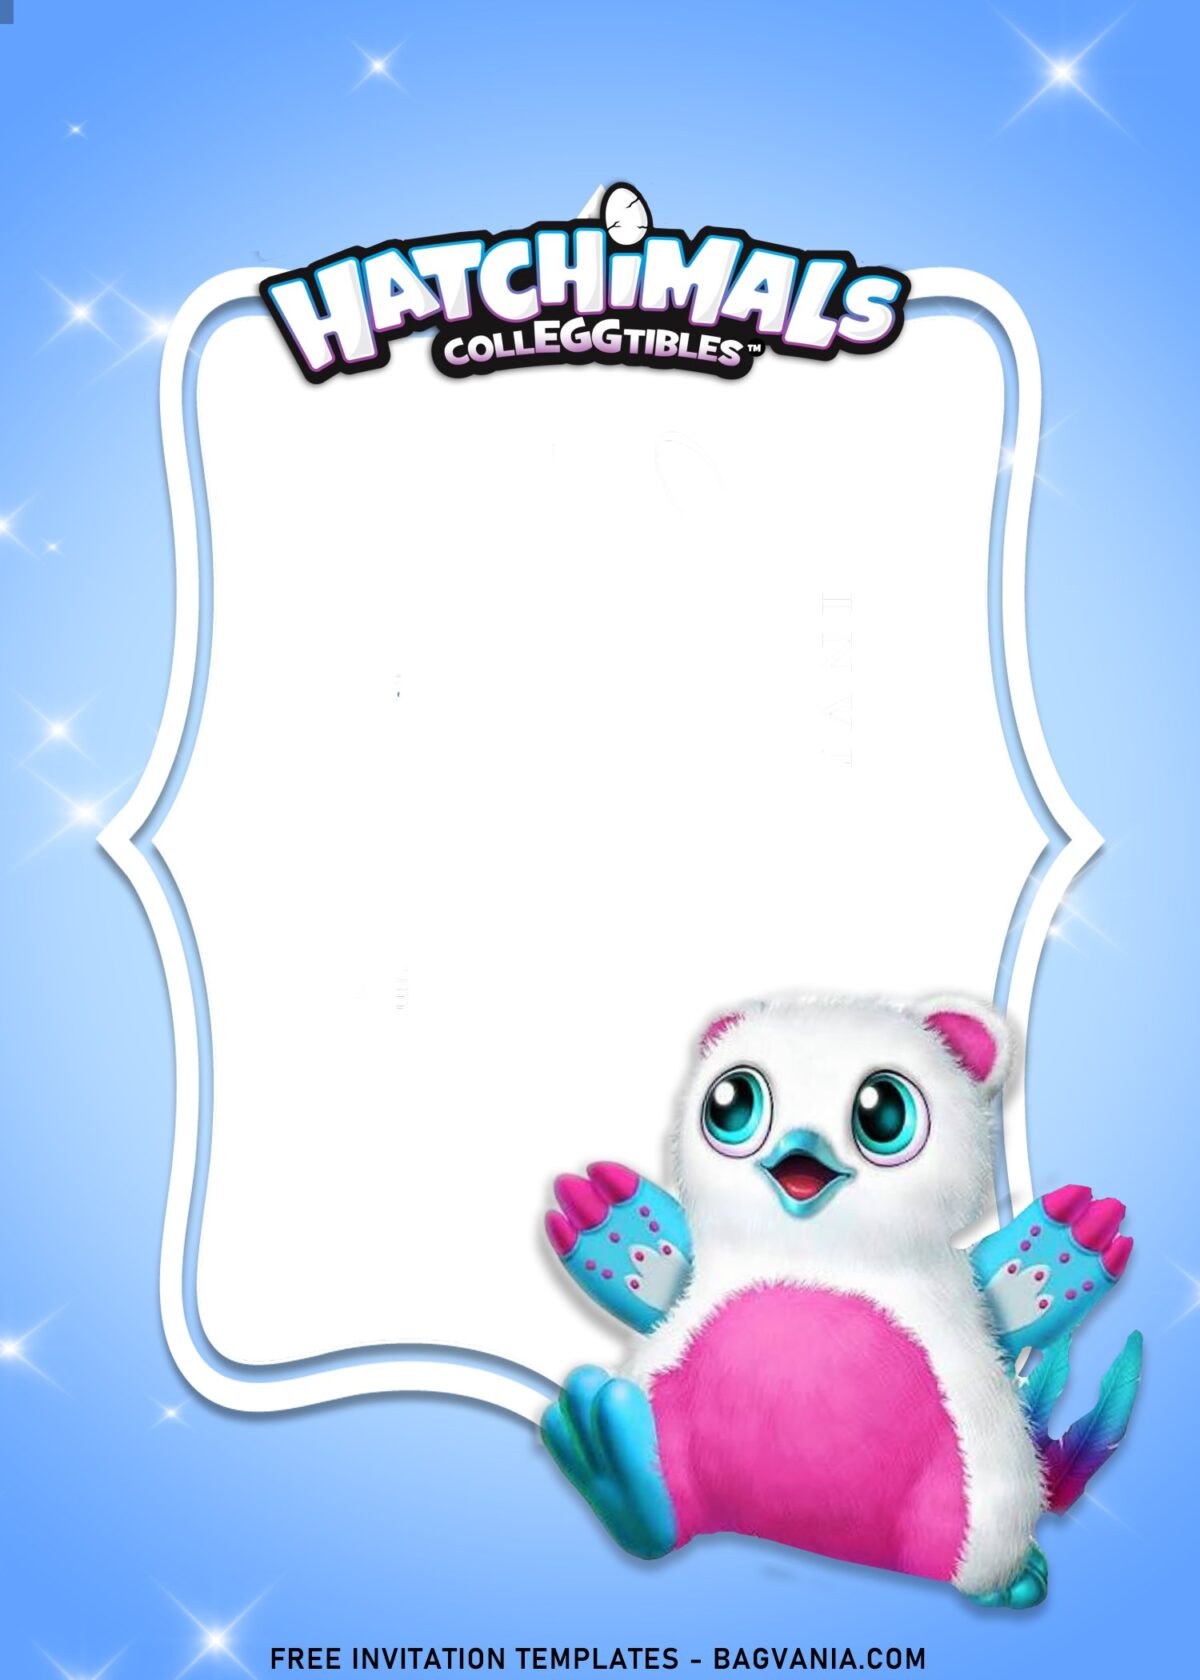 7+ Twinkly Cute Hatchimals Birthday Invitation Templates with adorable 